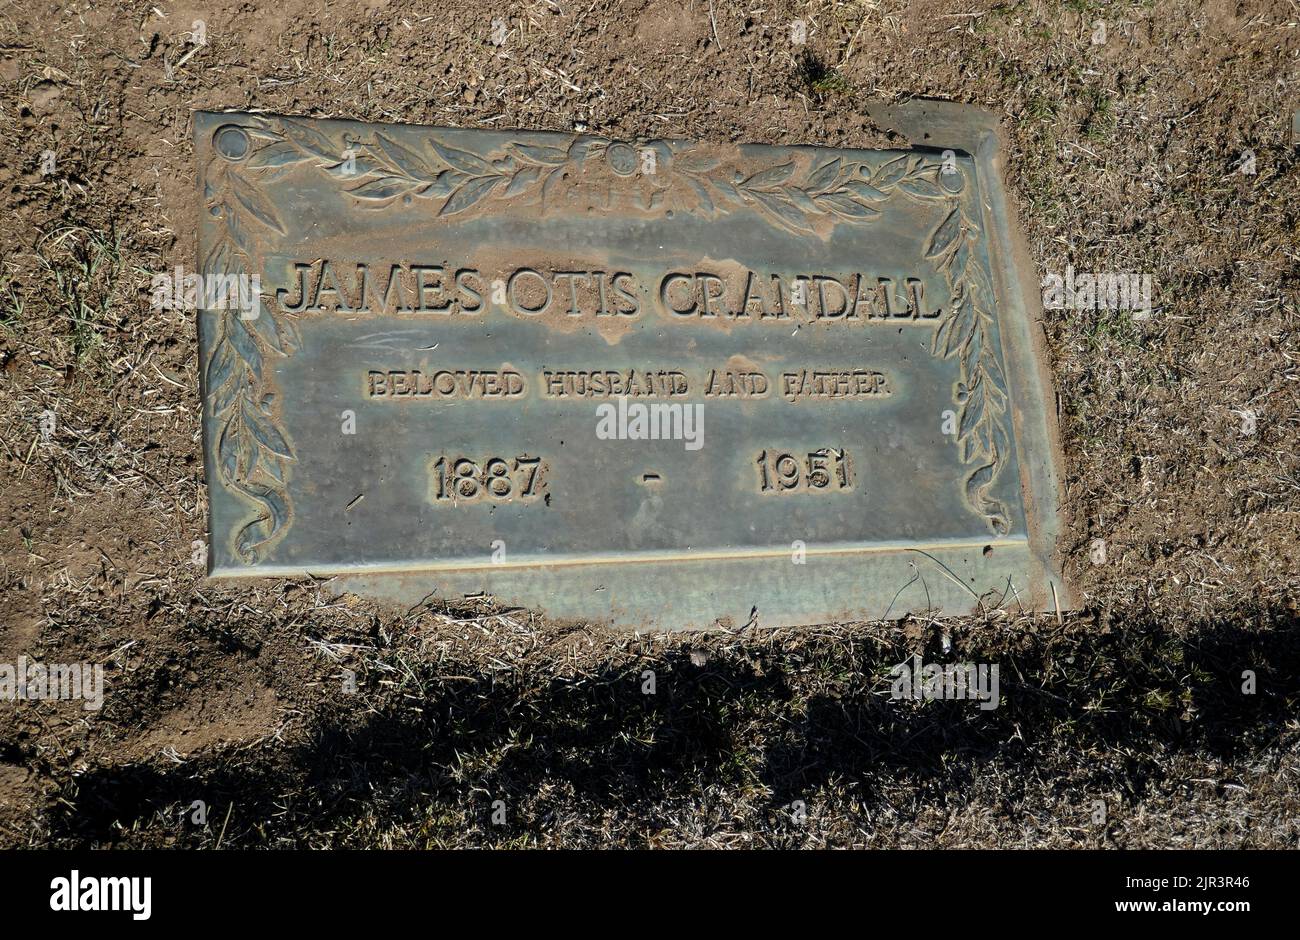 Inglewood, California, USA 19th August 2022 Baseball Player James Otis 'Doc' Crandall's Grave in Nignonette Section at Inglewood Park Cemetery on August 19, 2022 in Inglewood, Los Angeles, California, USA. Photo by Barry King/Alamy Stock Photo Stock Photo